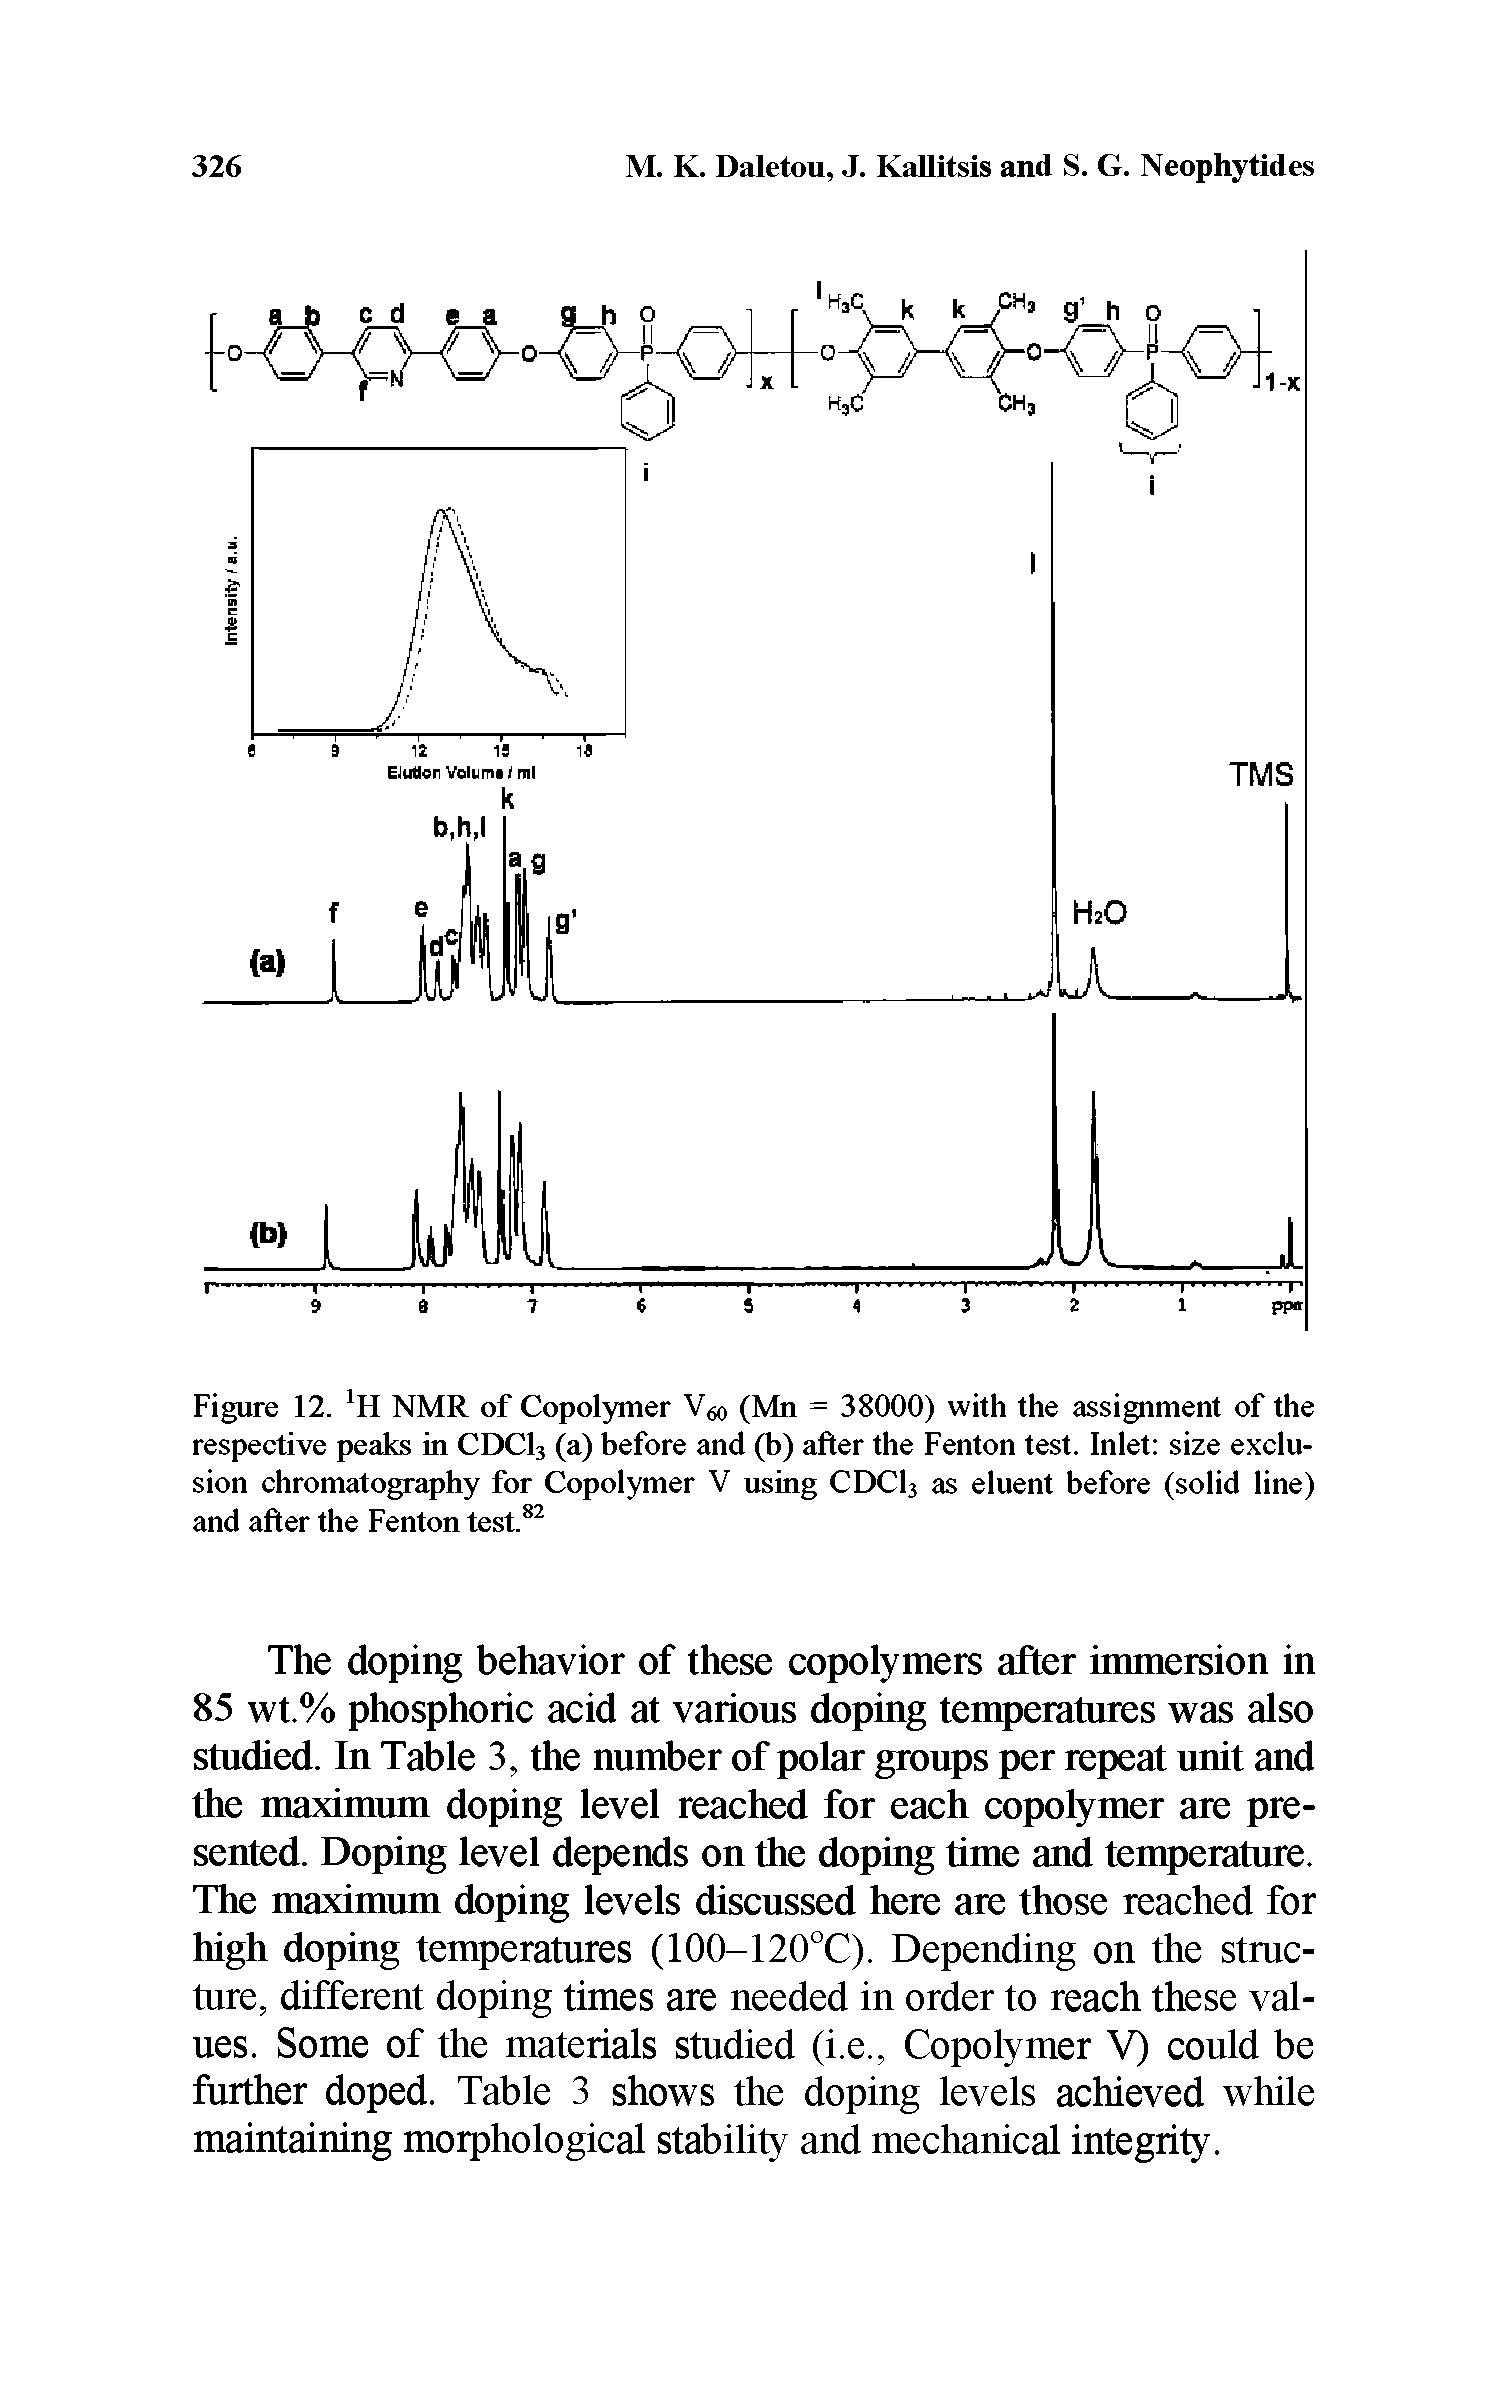 Figure 12. H NMR of Copolymer V , (Mn = 38000) with the assignment of the respective peaks in CDCI3 (a) before and (b) after the Fenton test. Inlet size exclusion chromatography for Copolymer V using CDCI3 as eluent before (solid line) and after the Fenton test. ...